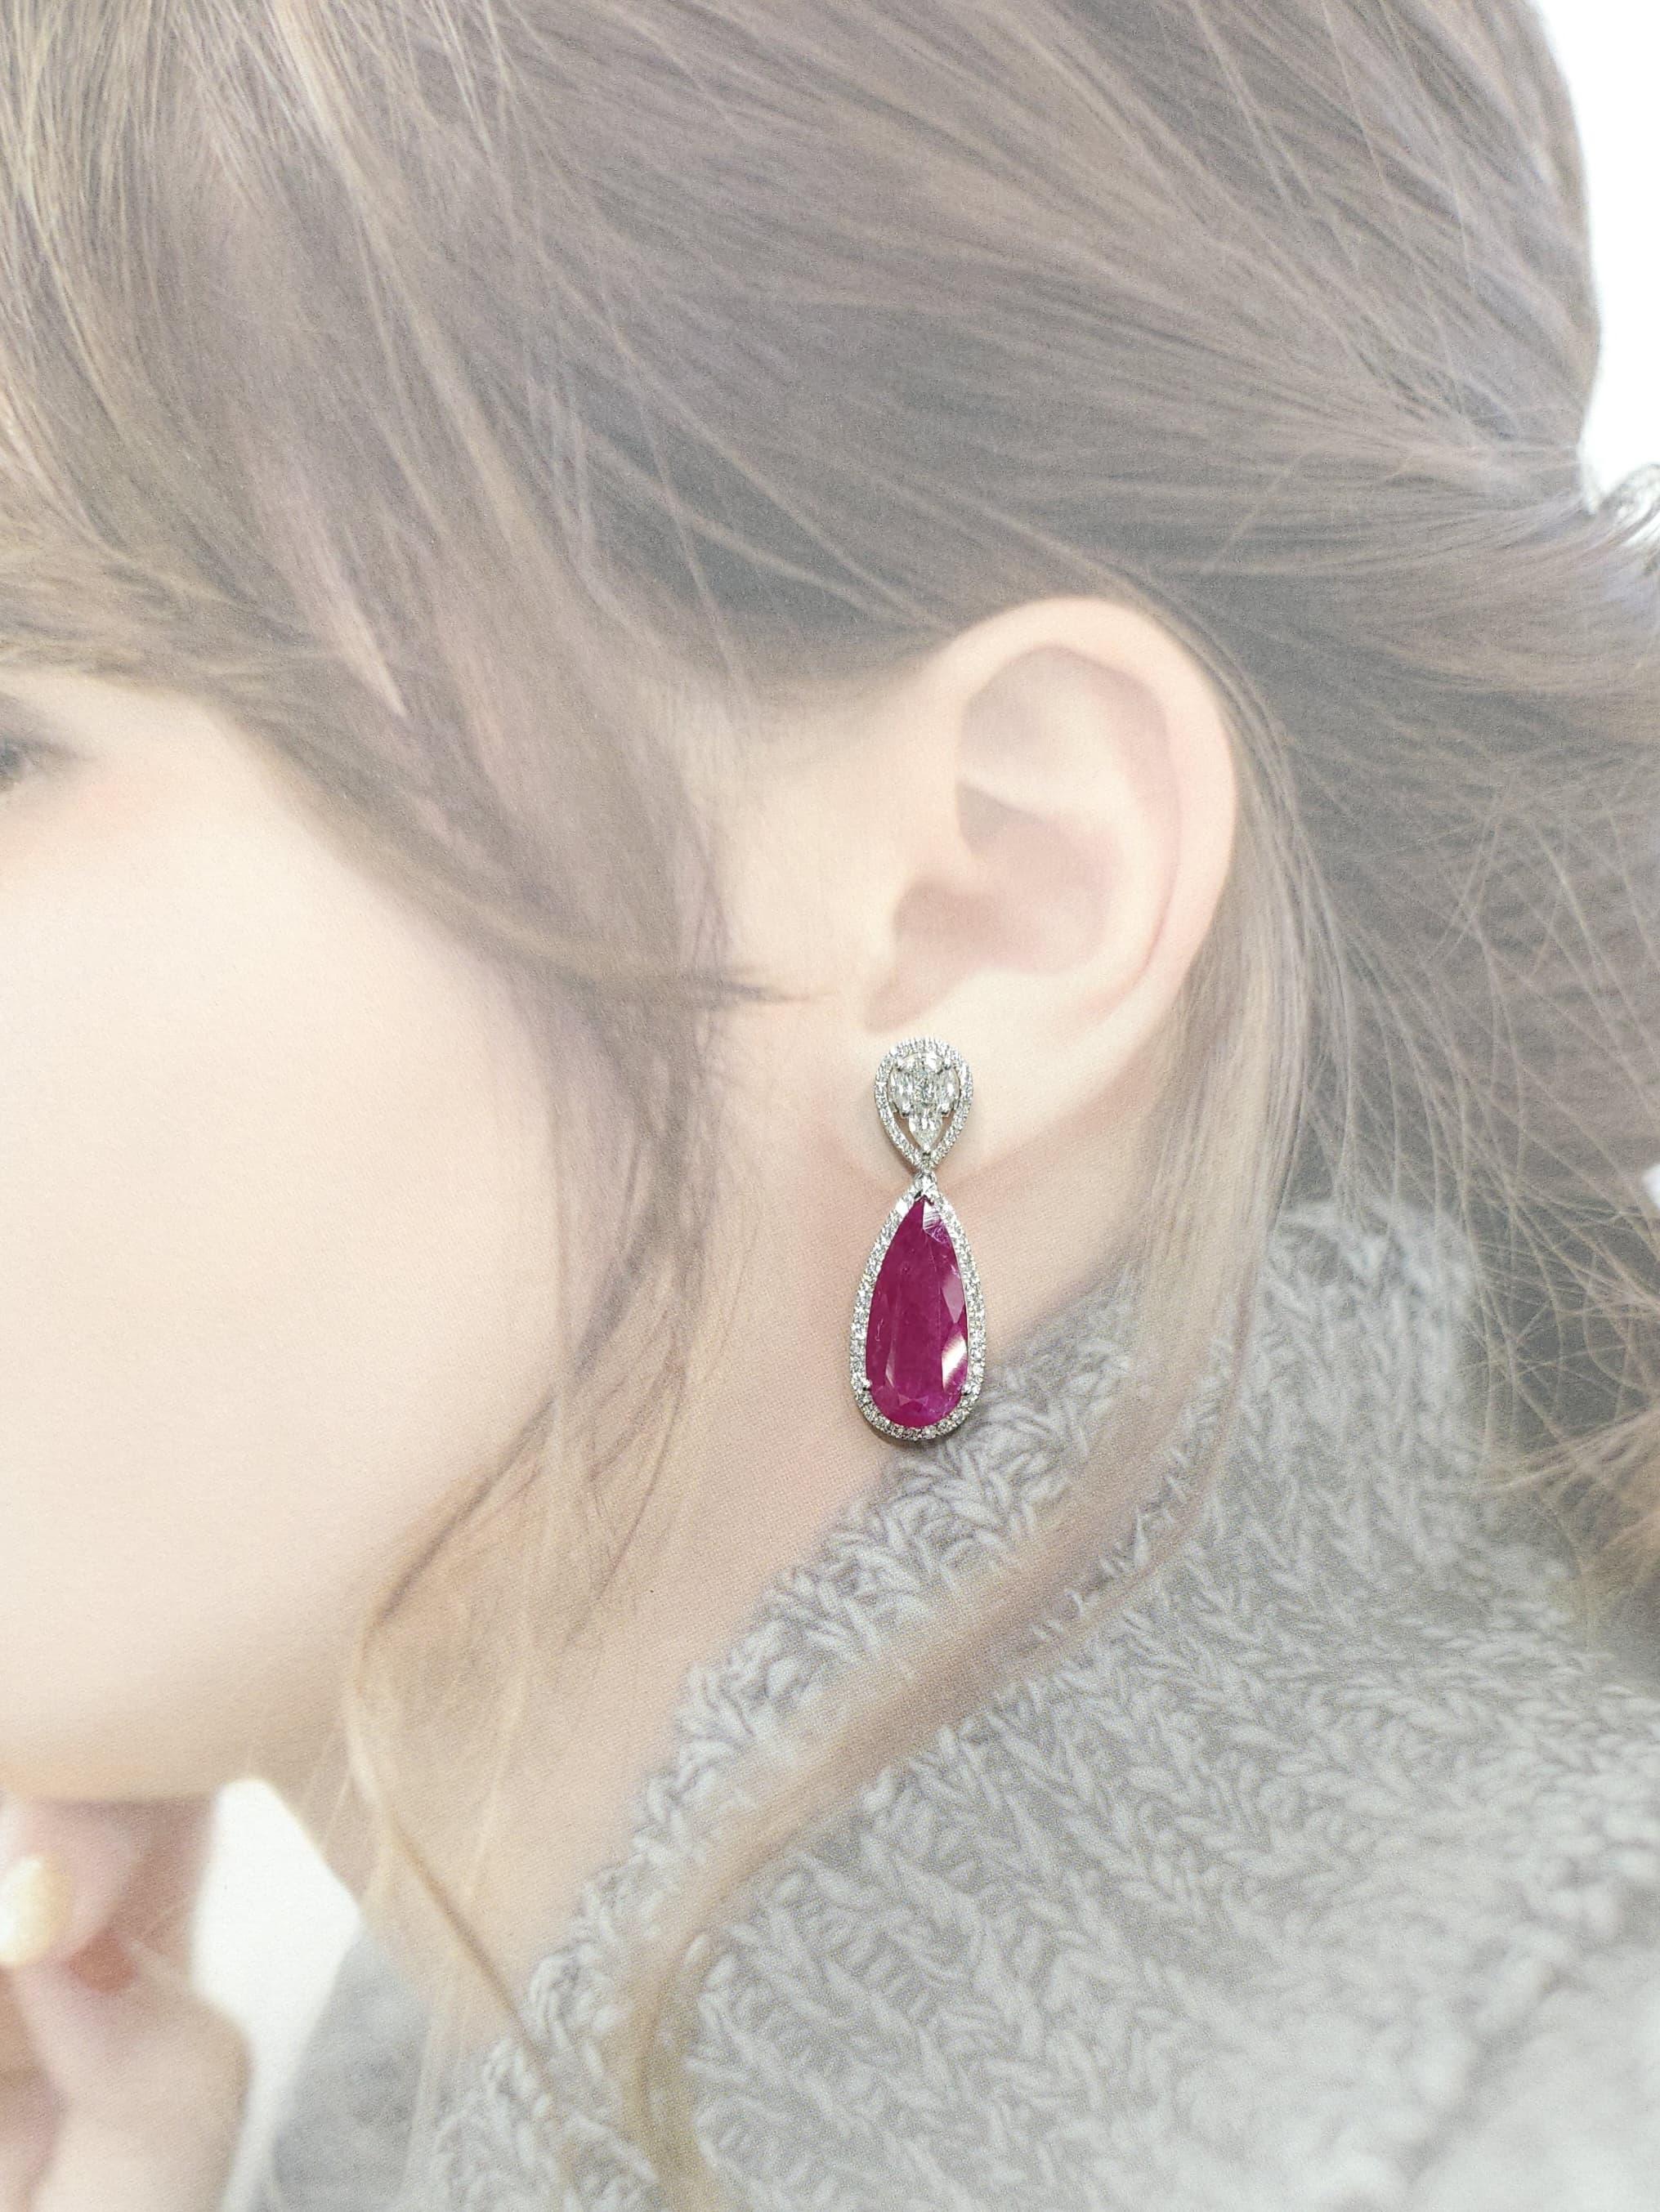 Indulge in extravagance with these breathtaking dangling earrings that exude opulence and grandeur. Featuring a stunning IGI Certified 18.49 Carat Burma Ruby, with two pear-shaped rubies approximately 9.66 and 8.83 carats respectively, in an intense